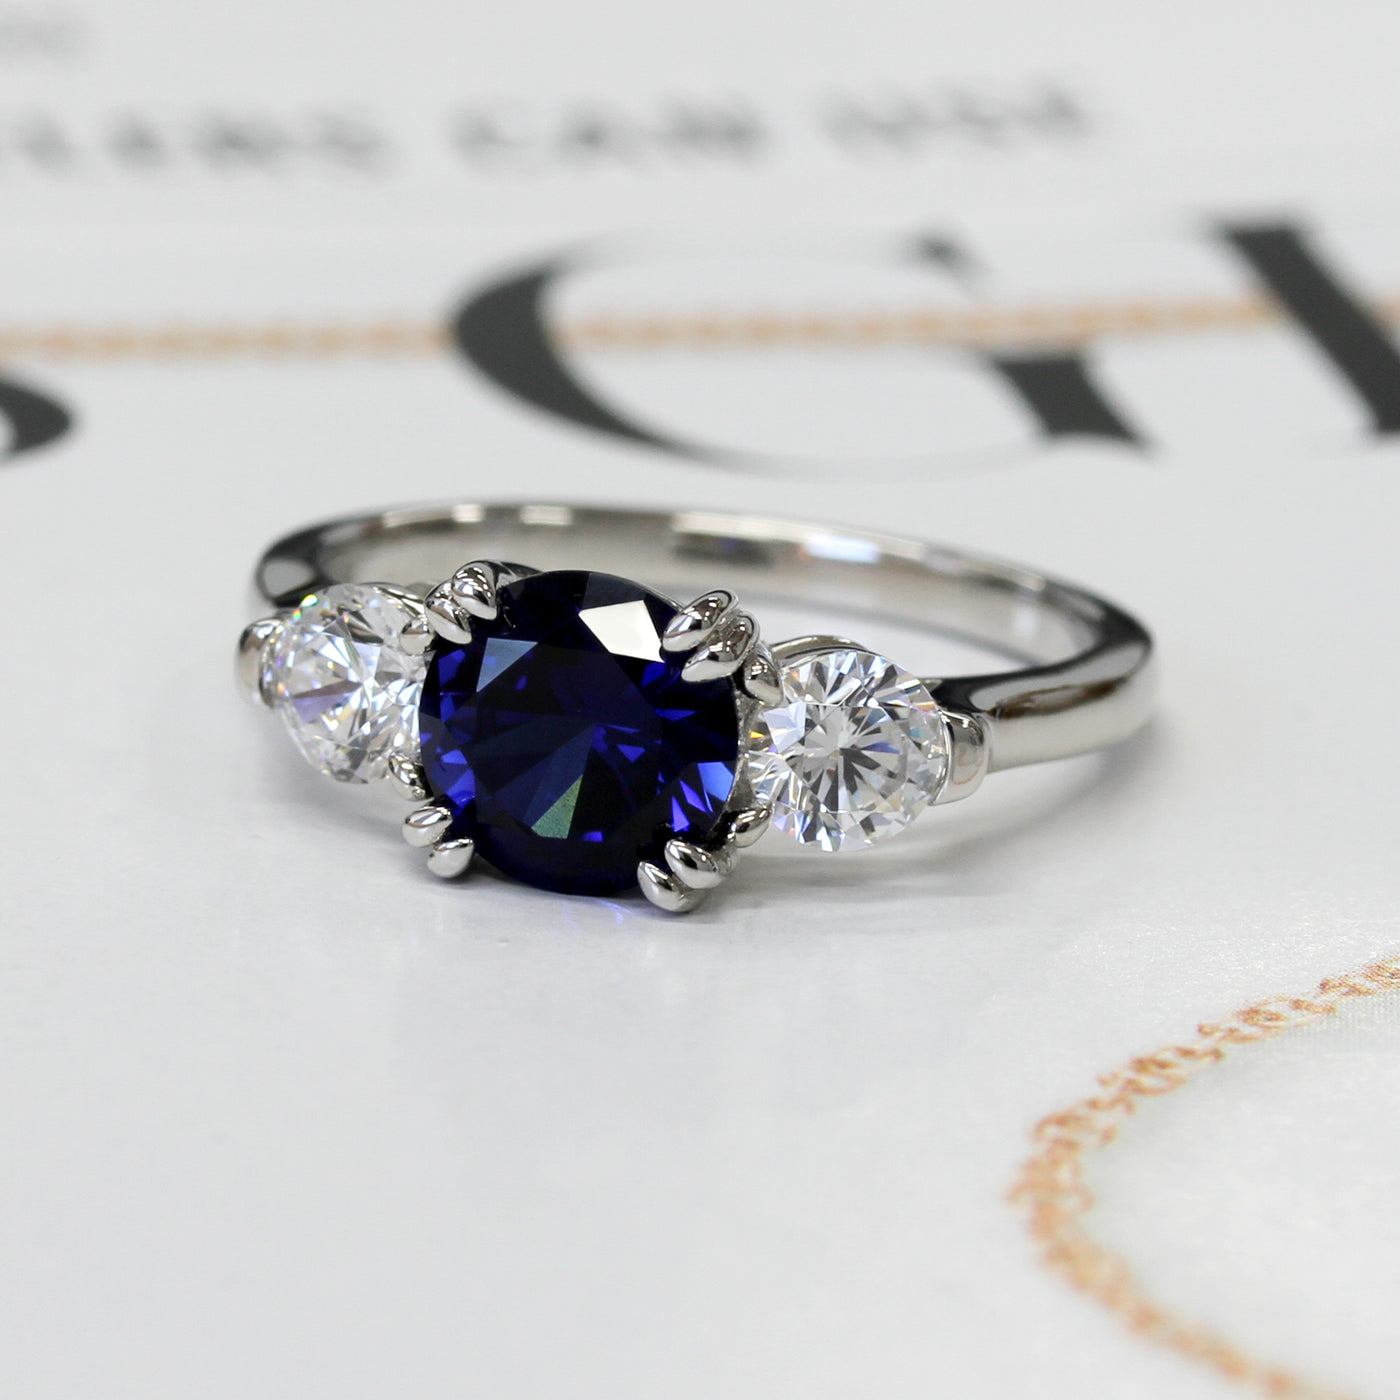 2 CT Simulated Blue Sapphire Ring, Platinum Plated Sterling Silver